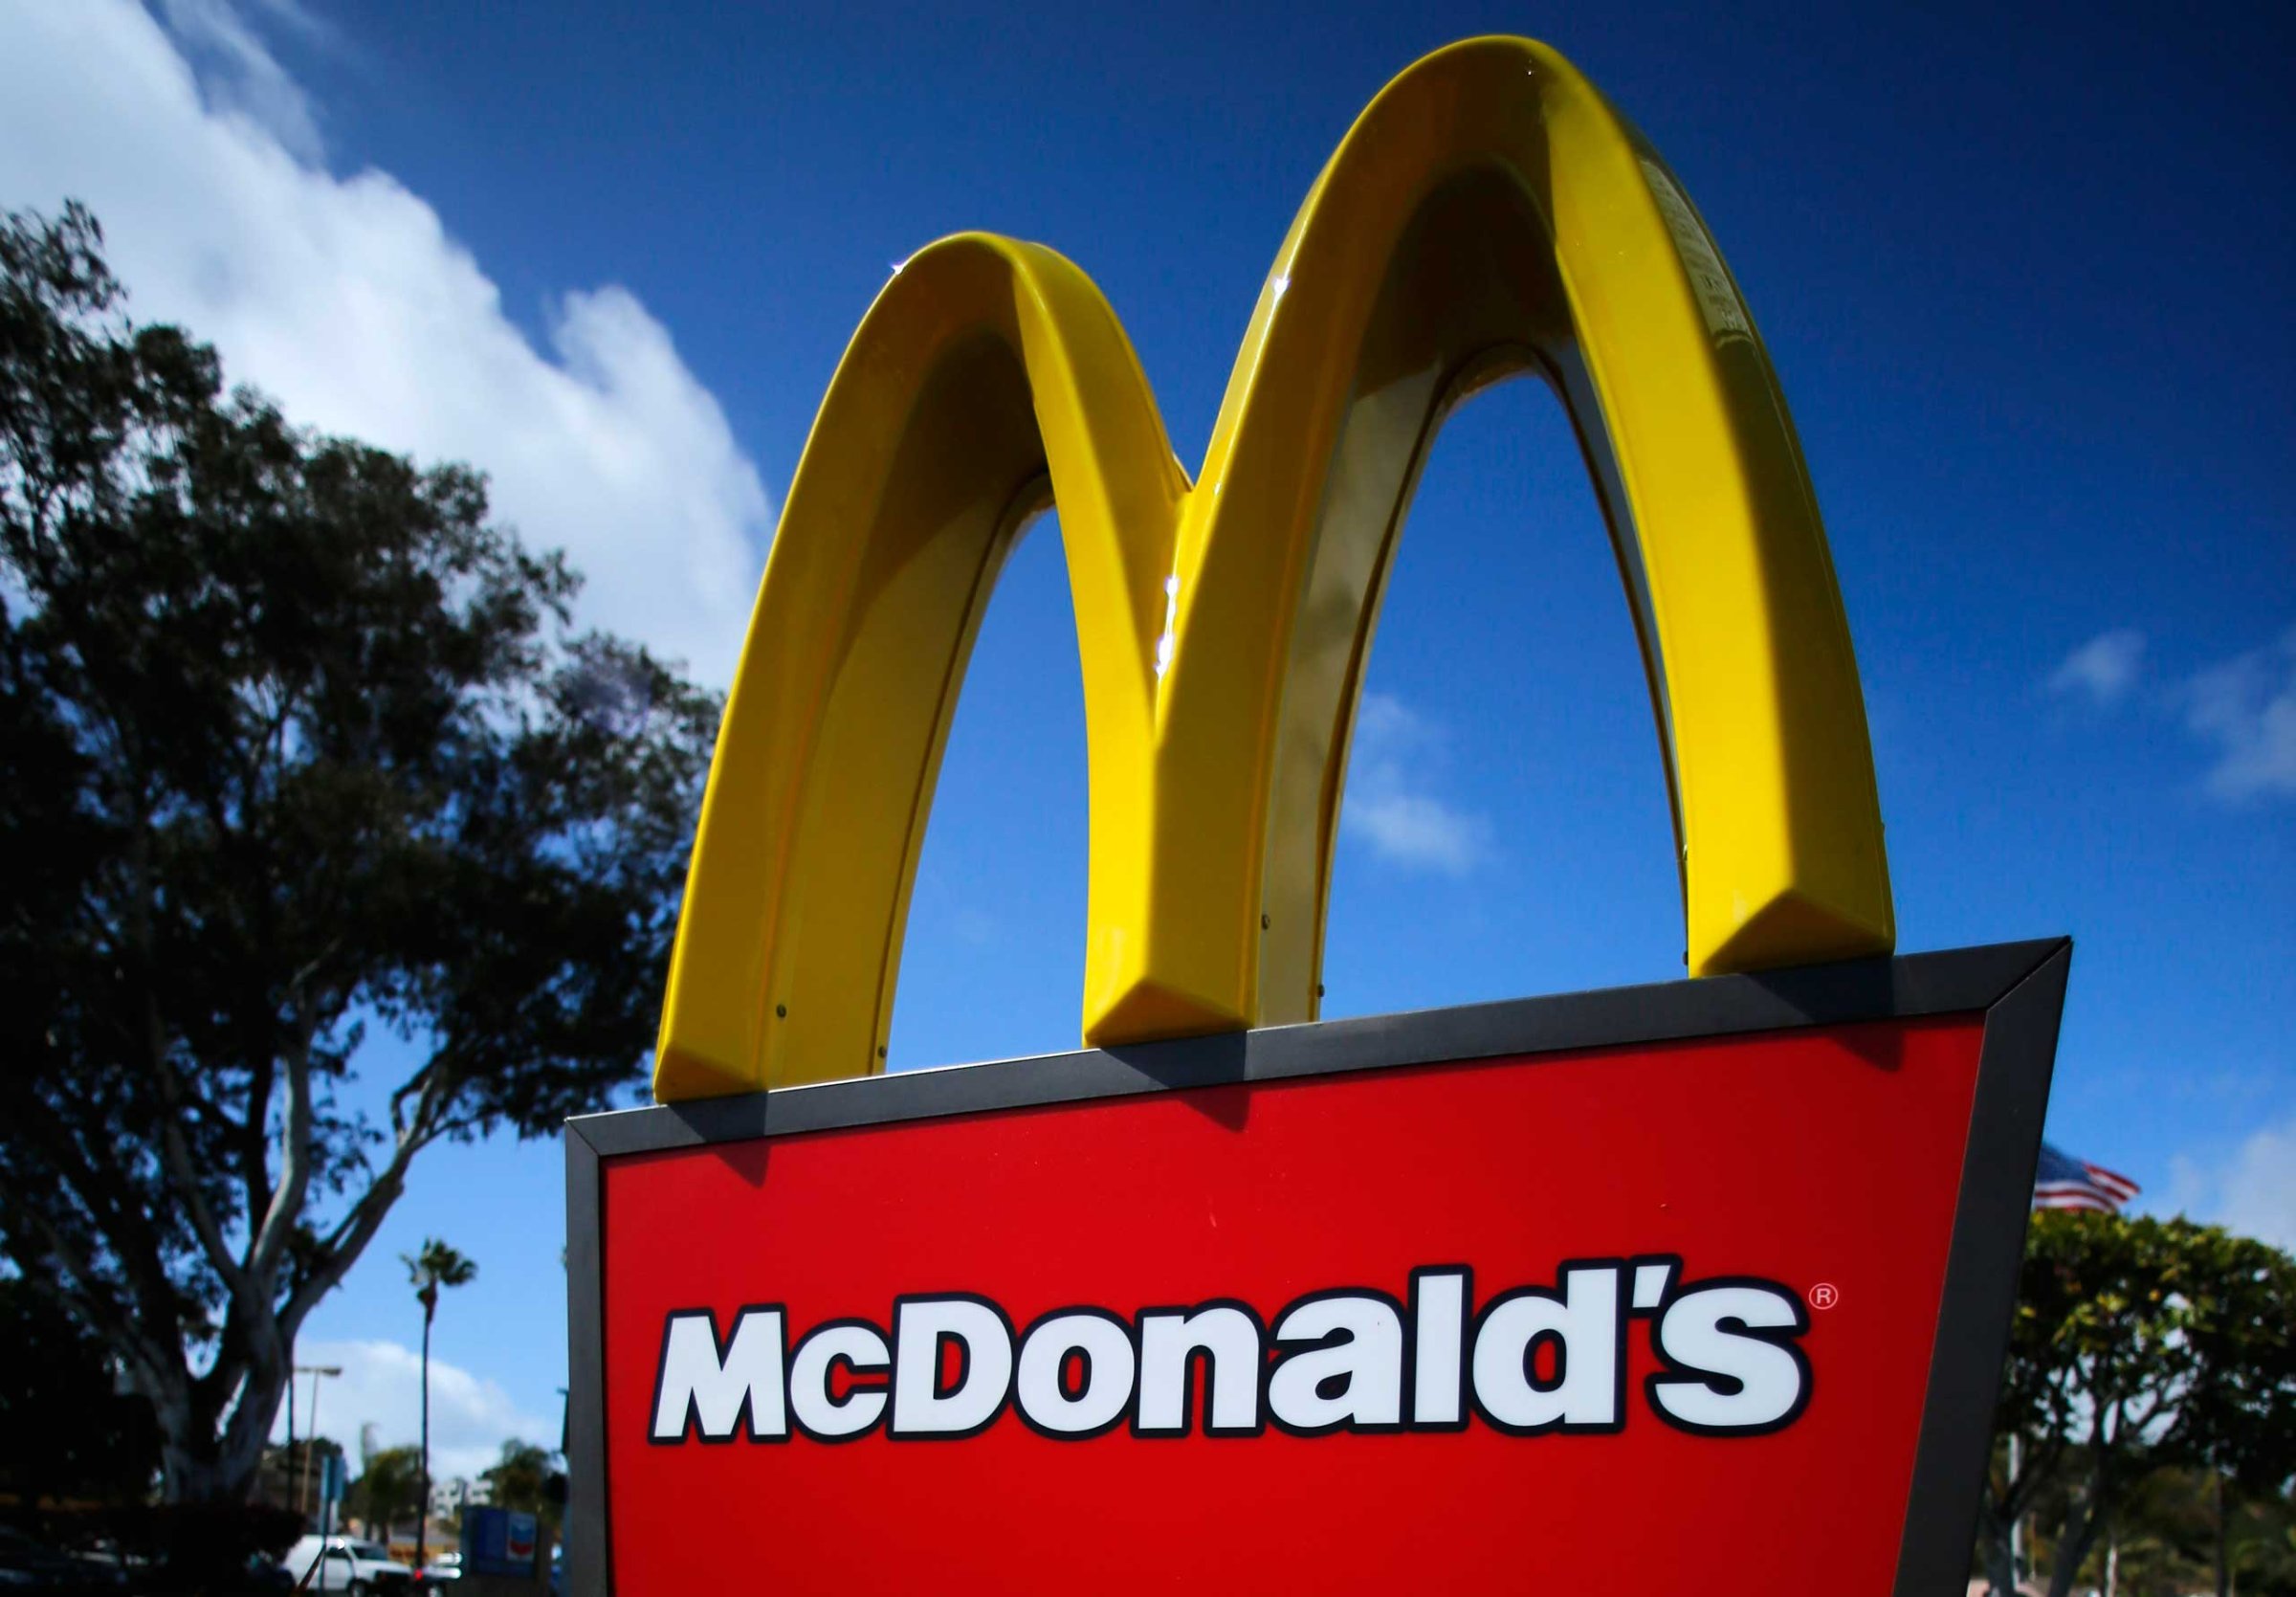 File photo of a McDonald's restaurant sign at a McDonald's restaurant in Del Mar, California